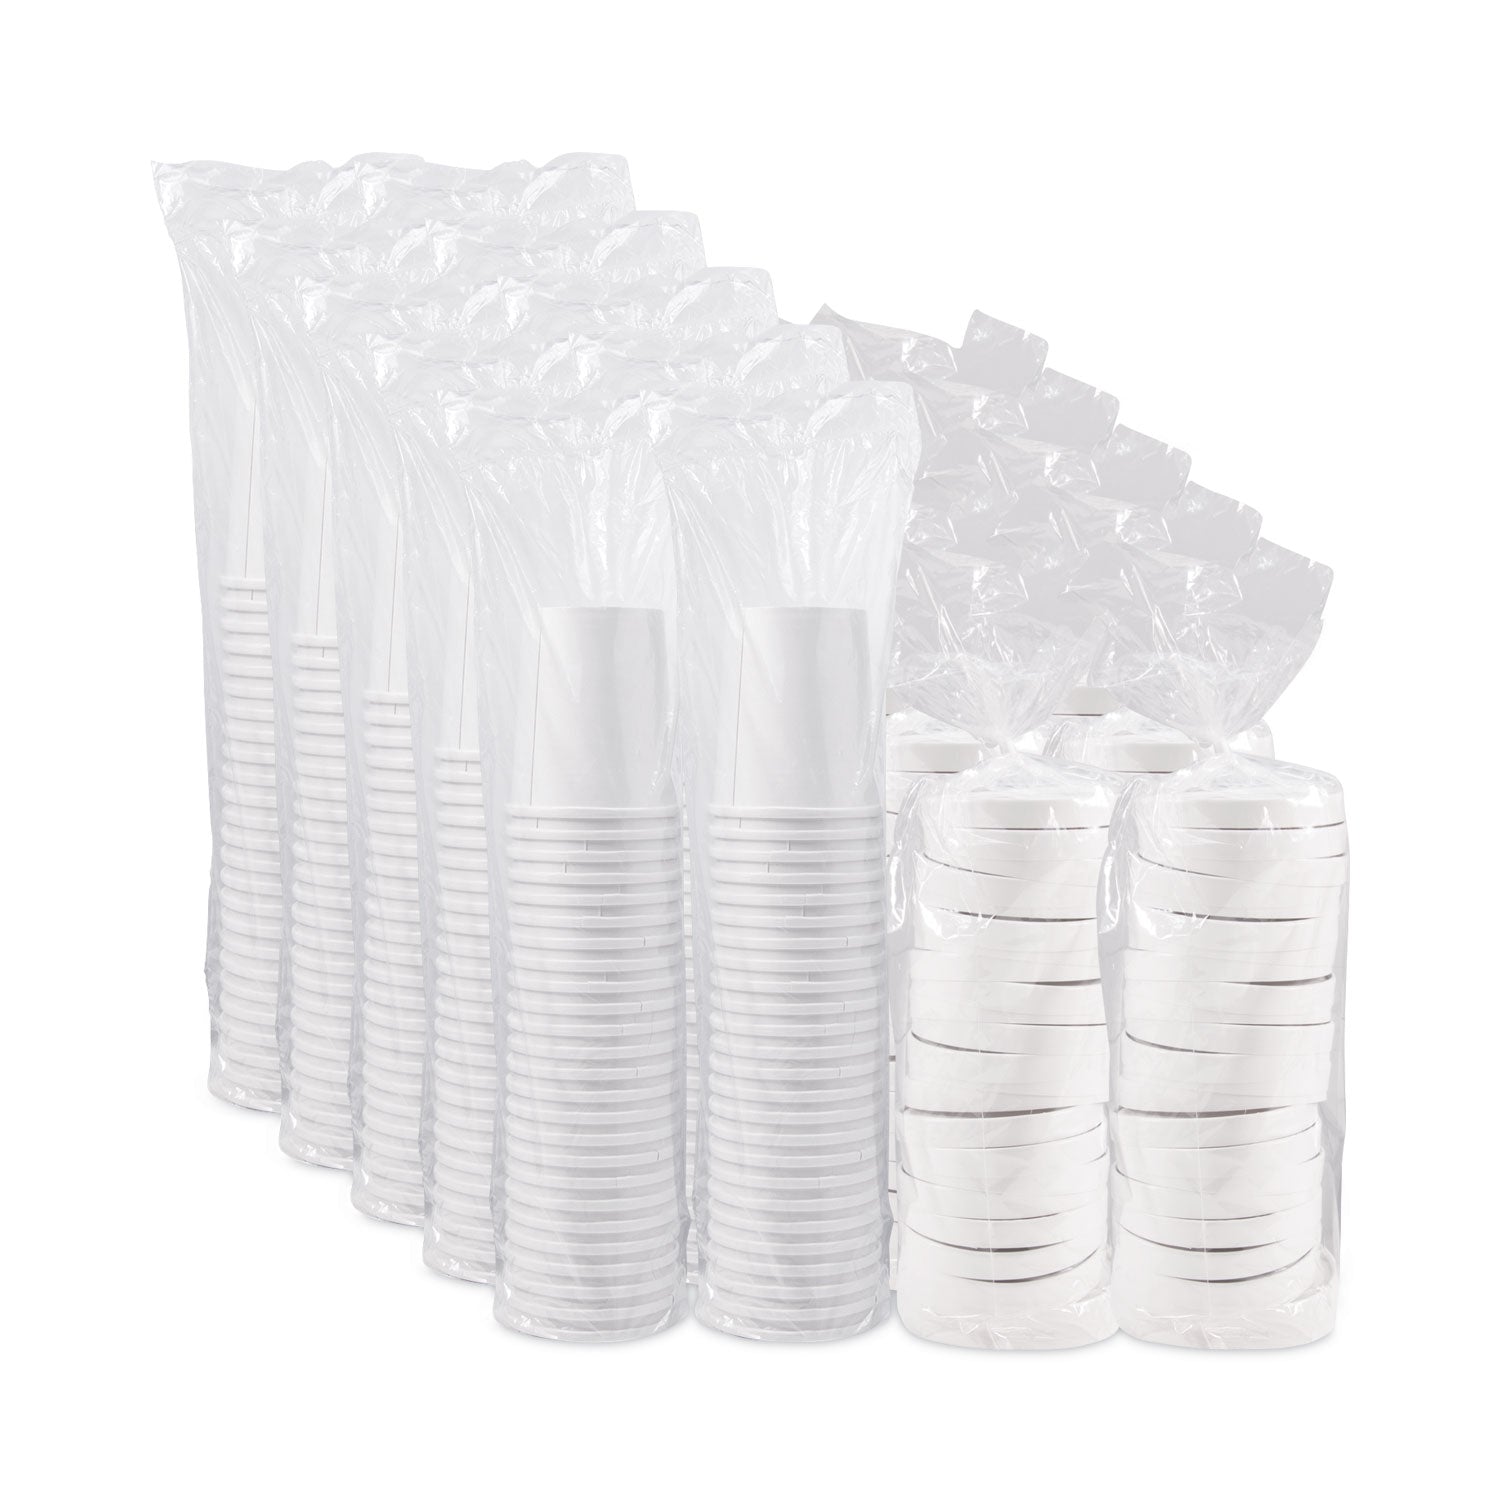 flexstyle-double-poly-food-combo-packs-32-oz-white-paper-25-cups-and-25-lids-pack-10-packs-carton_scckhb32a - 5